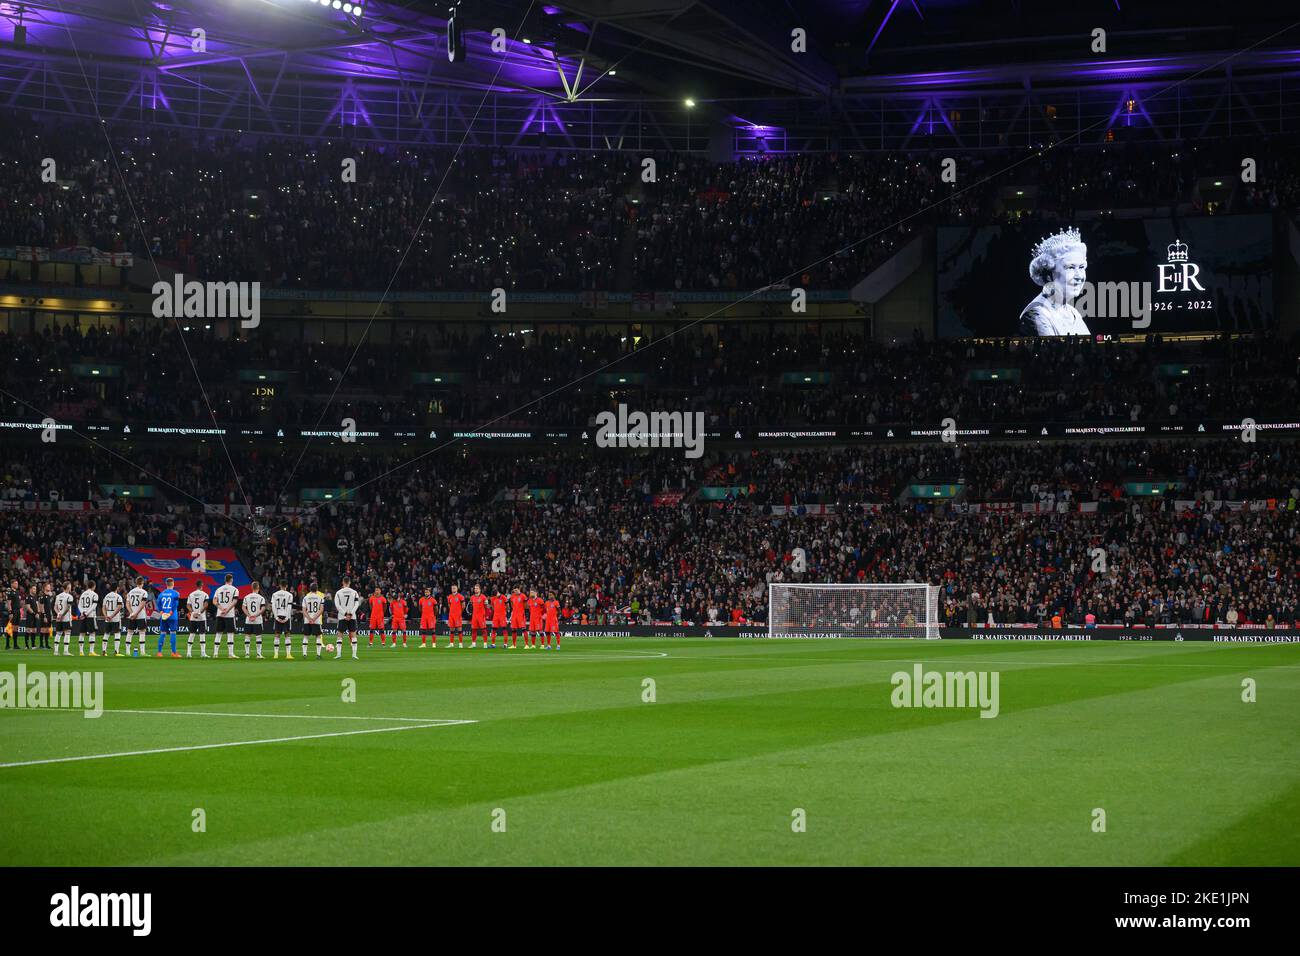 26 Sep 2022 - England v Germany - UEFA Nations League - League A - Group 3 - Wembley Stadium  England and Germany teams during a minute of silence to commemorate the death of Queen Elizabeth II before the UEFA Nations League match against Germany. Picture : Mark Pain / Alamy Live News Stock Photo